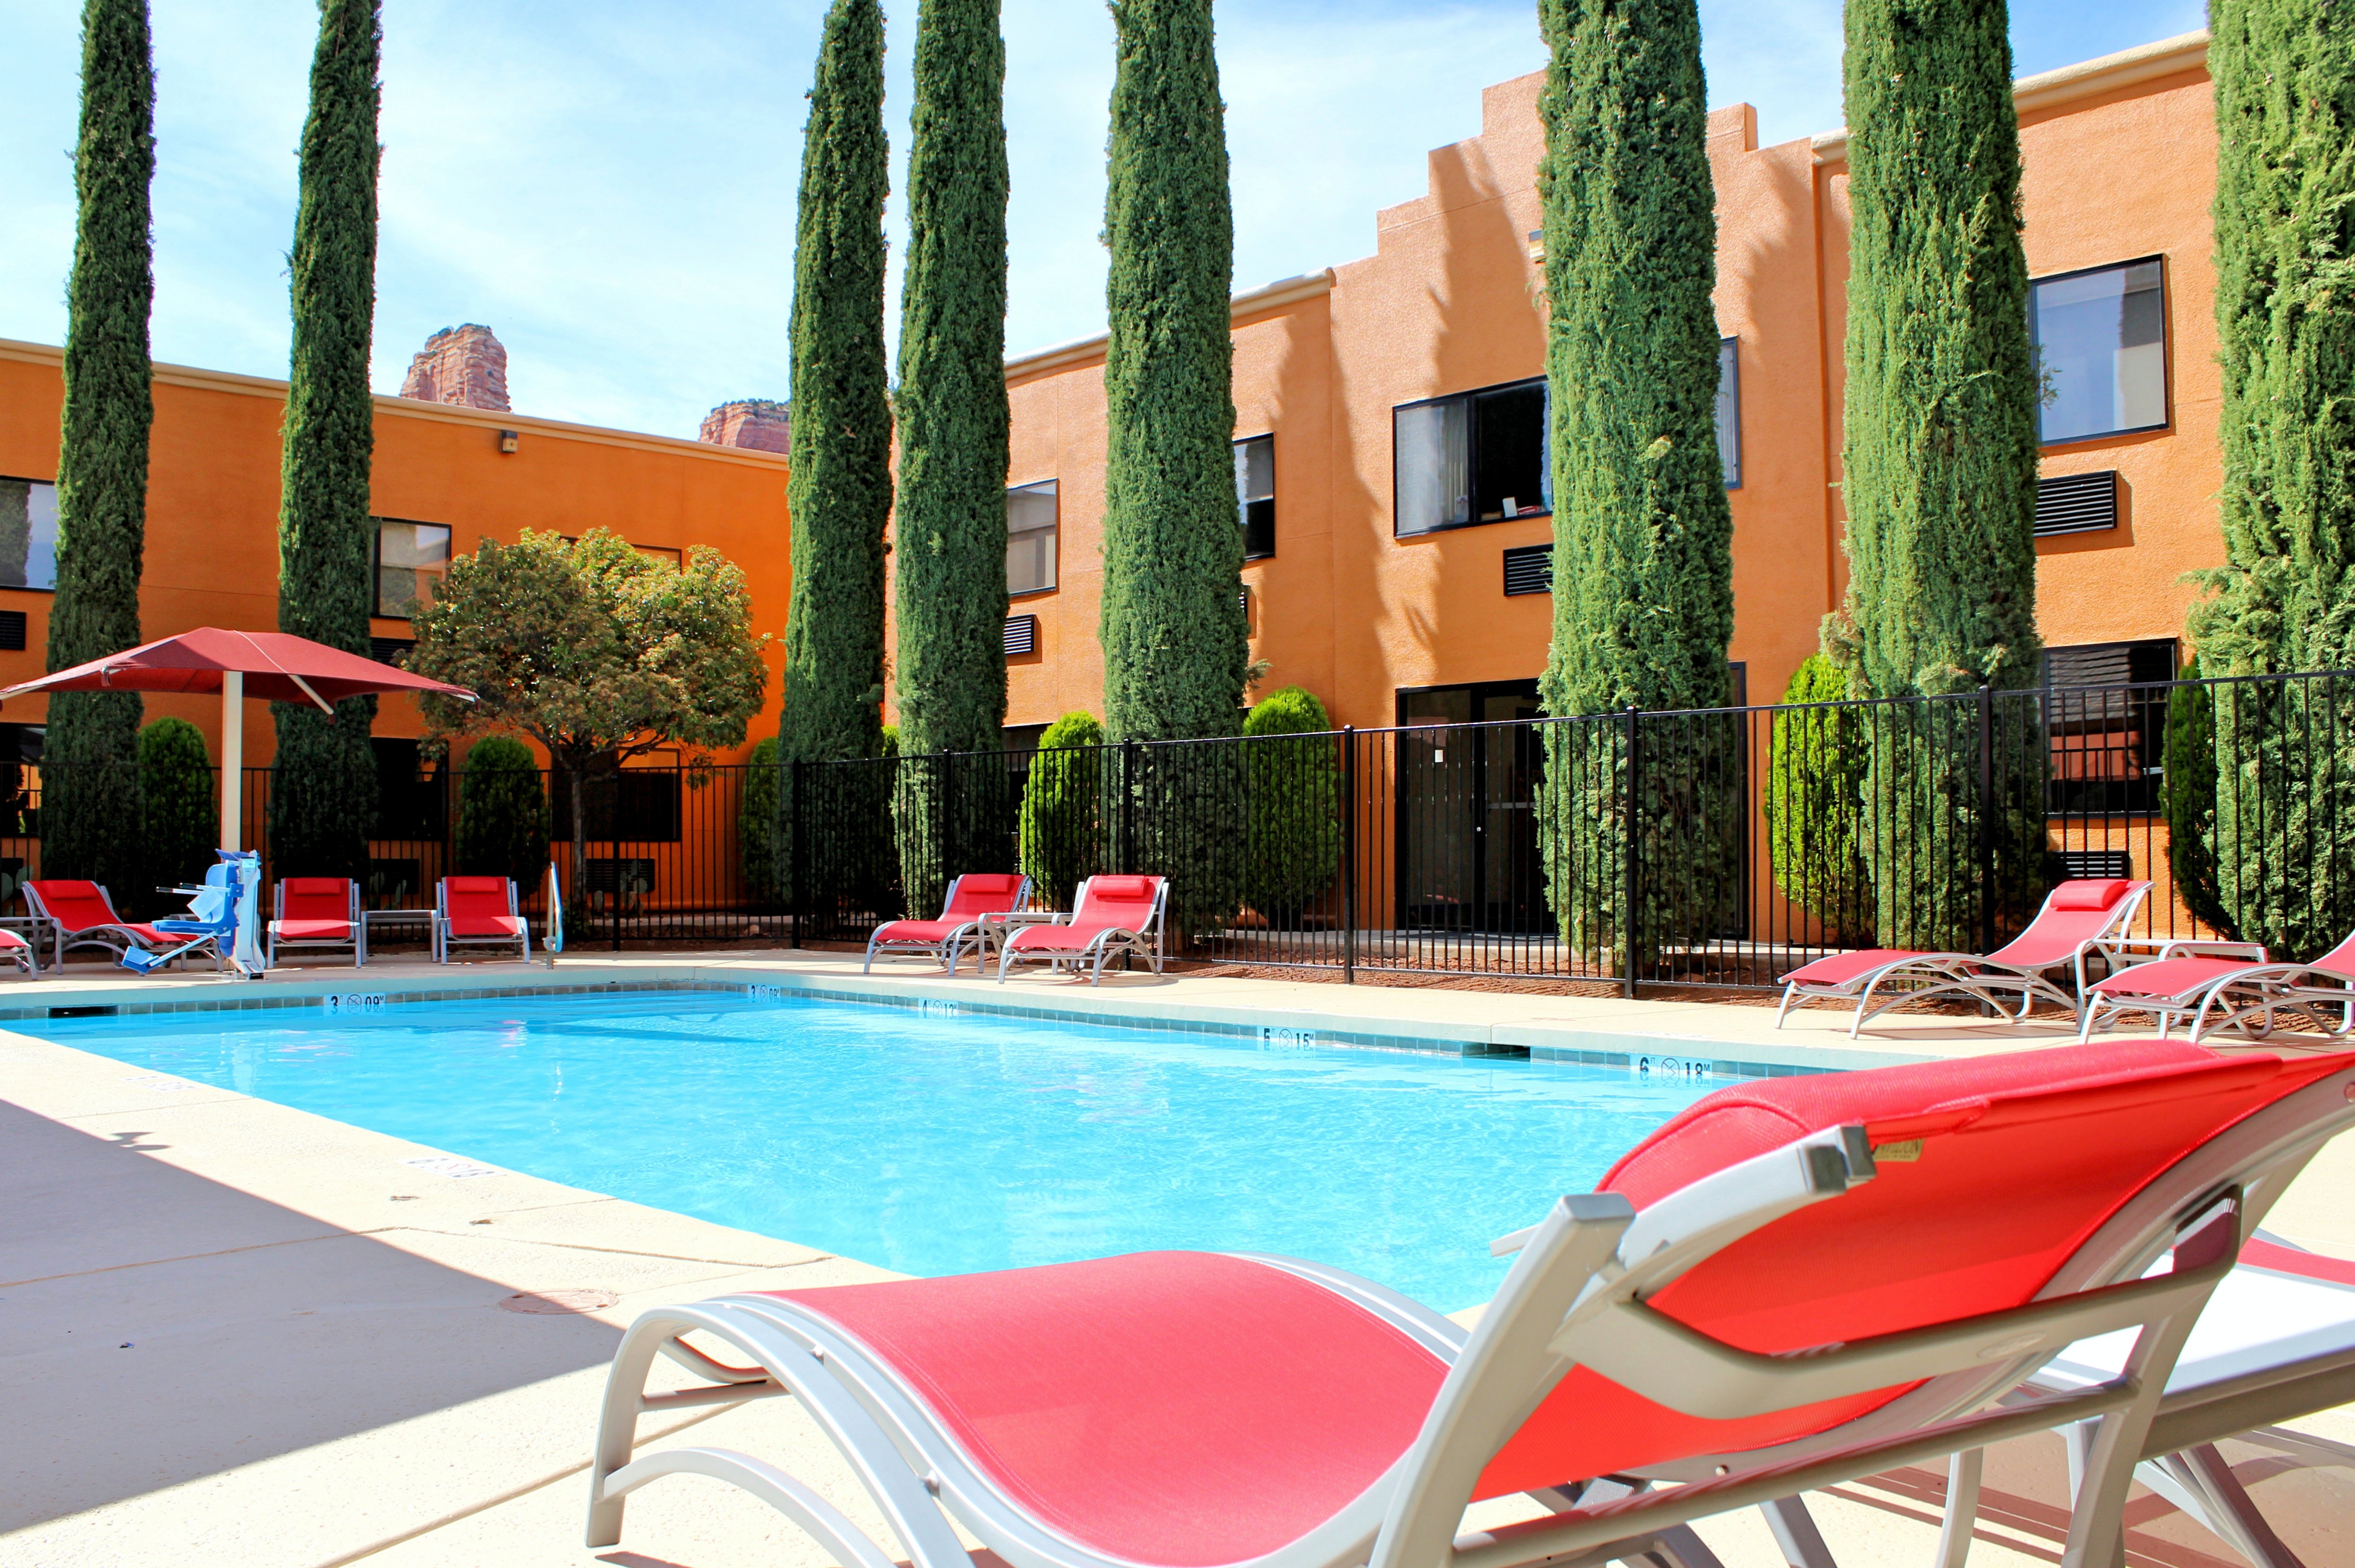 Relax and unwind in our beautiful outdoor pool and hot tub